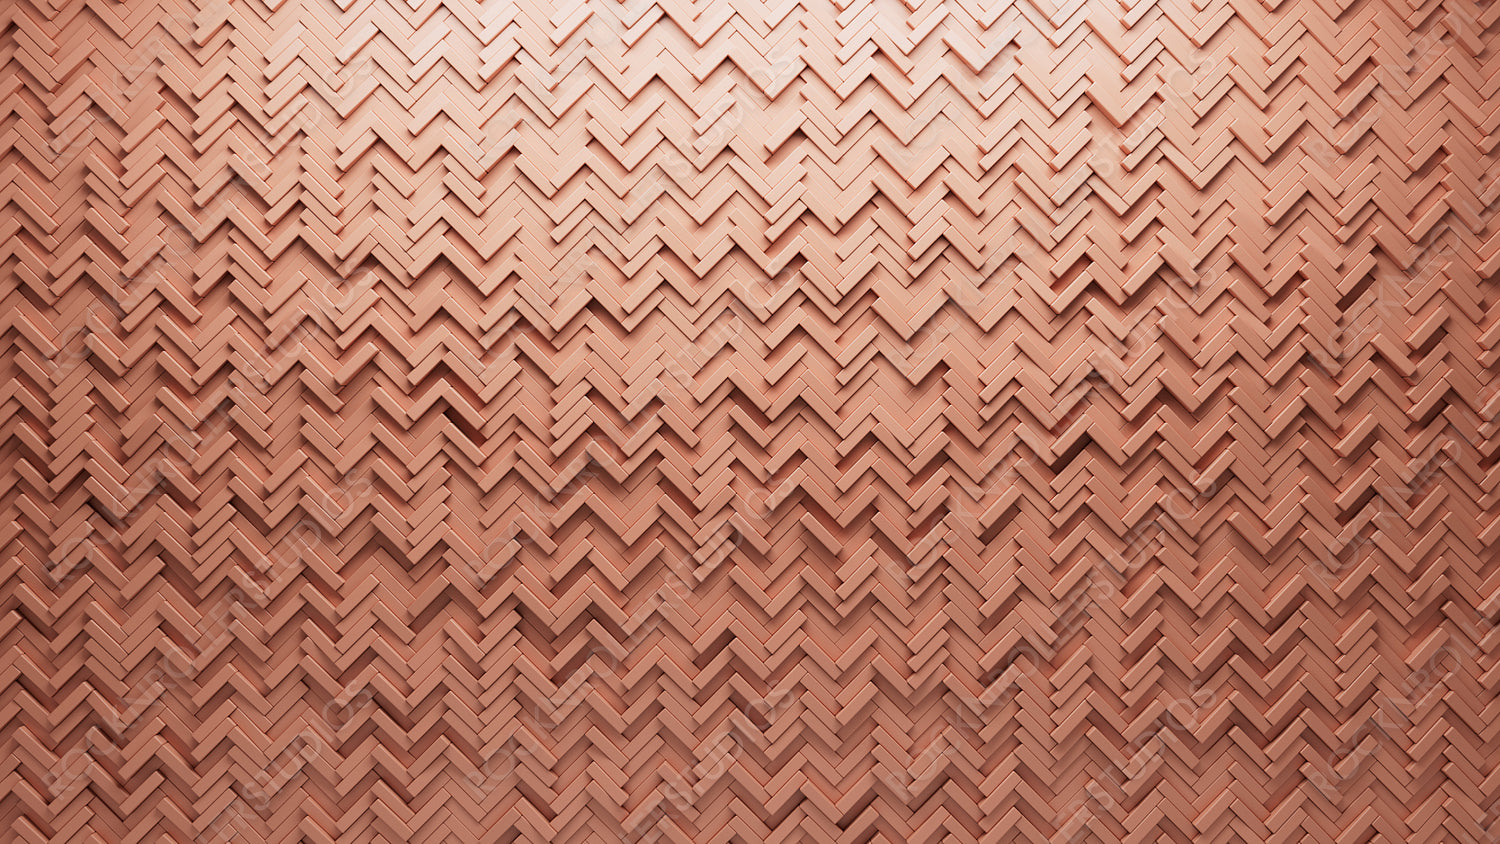 Futuristic, Peach Wall background with tiles. 3D, tile Wallpaper with Herringbone, Polished blocks. 3D Render